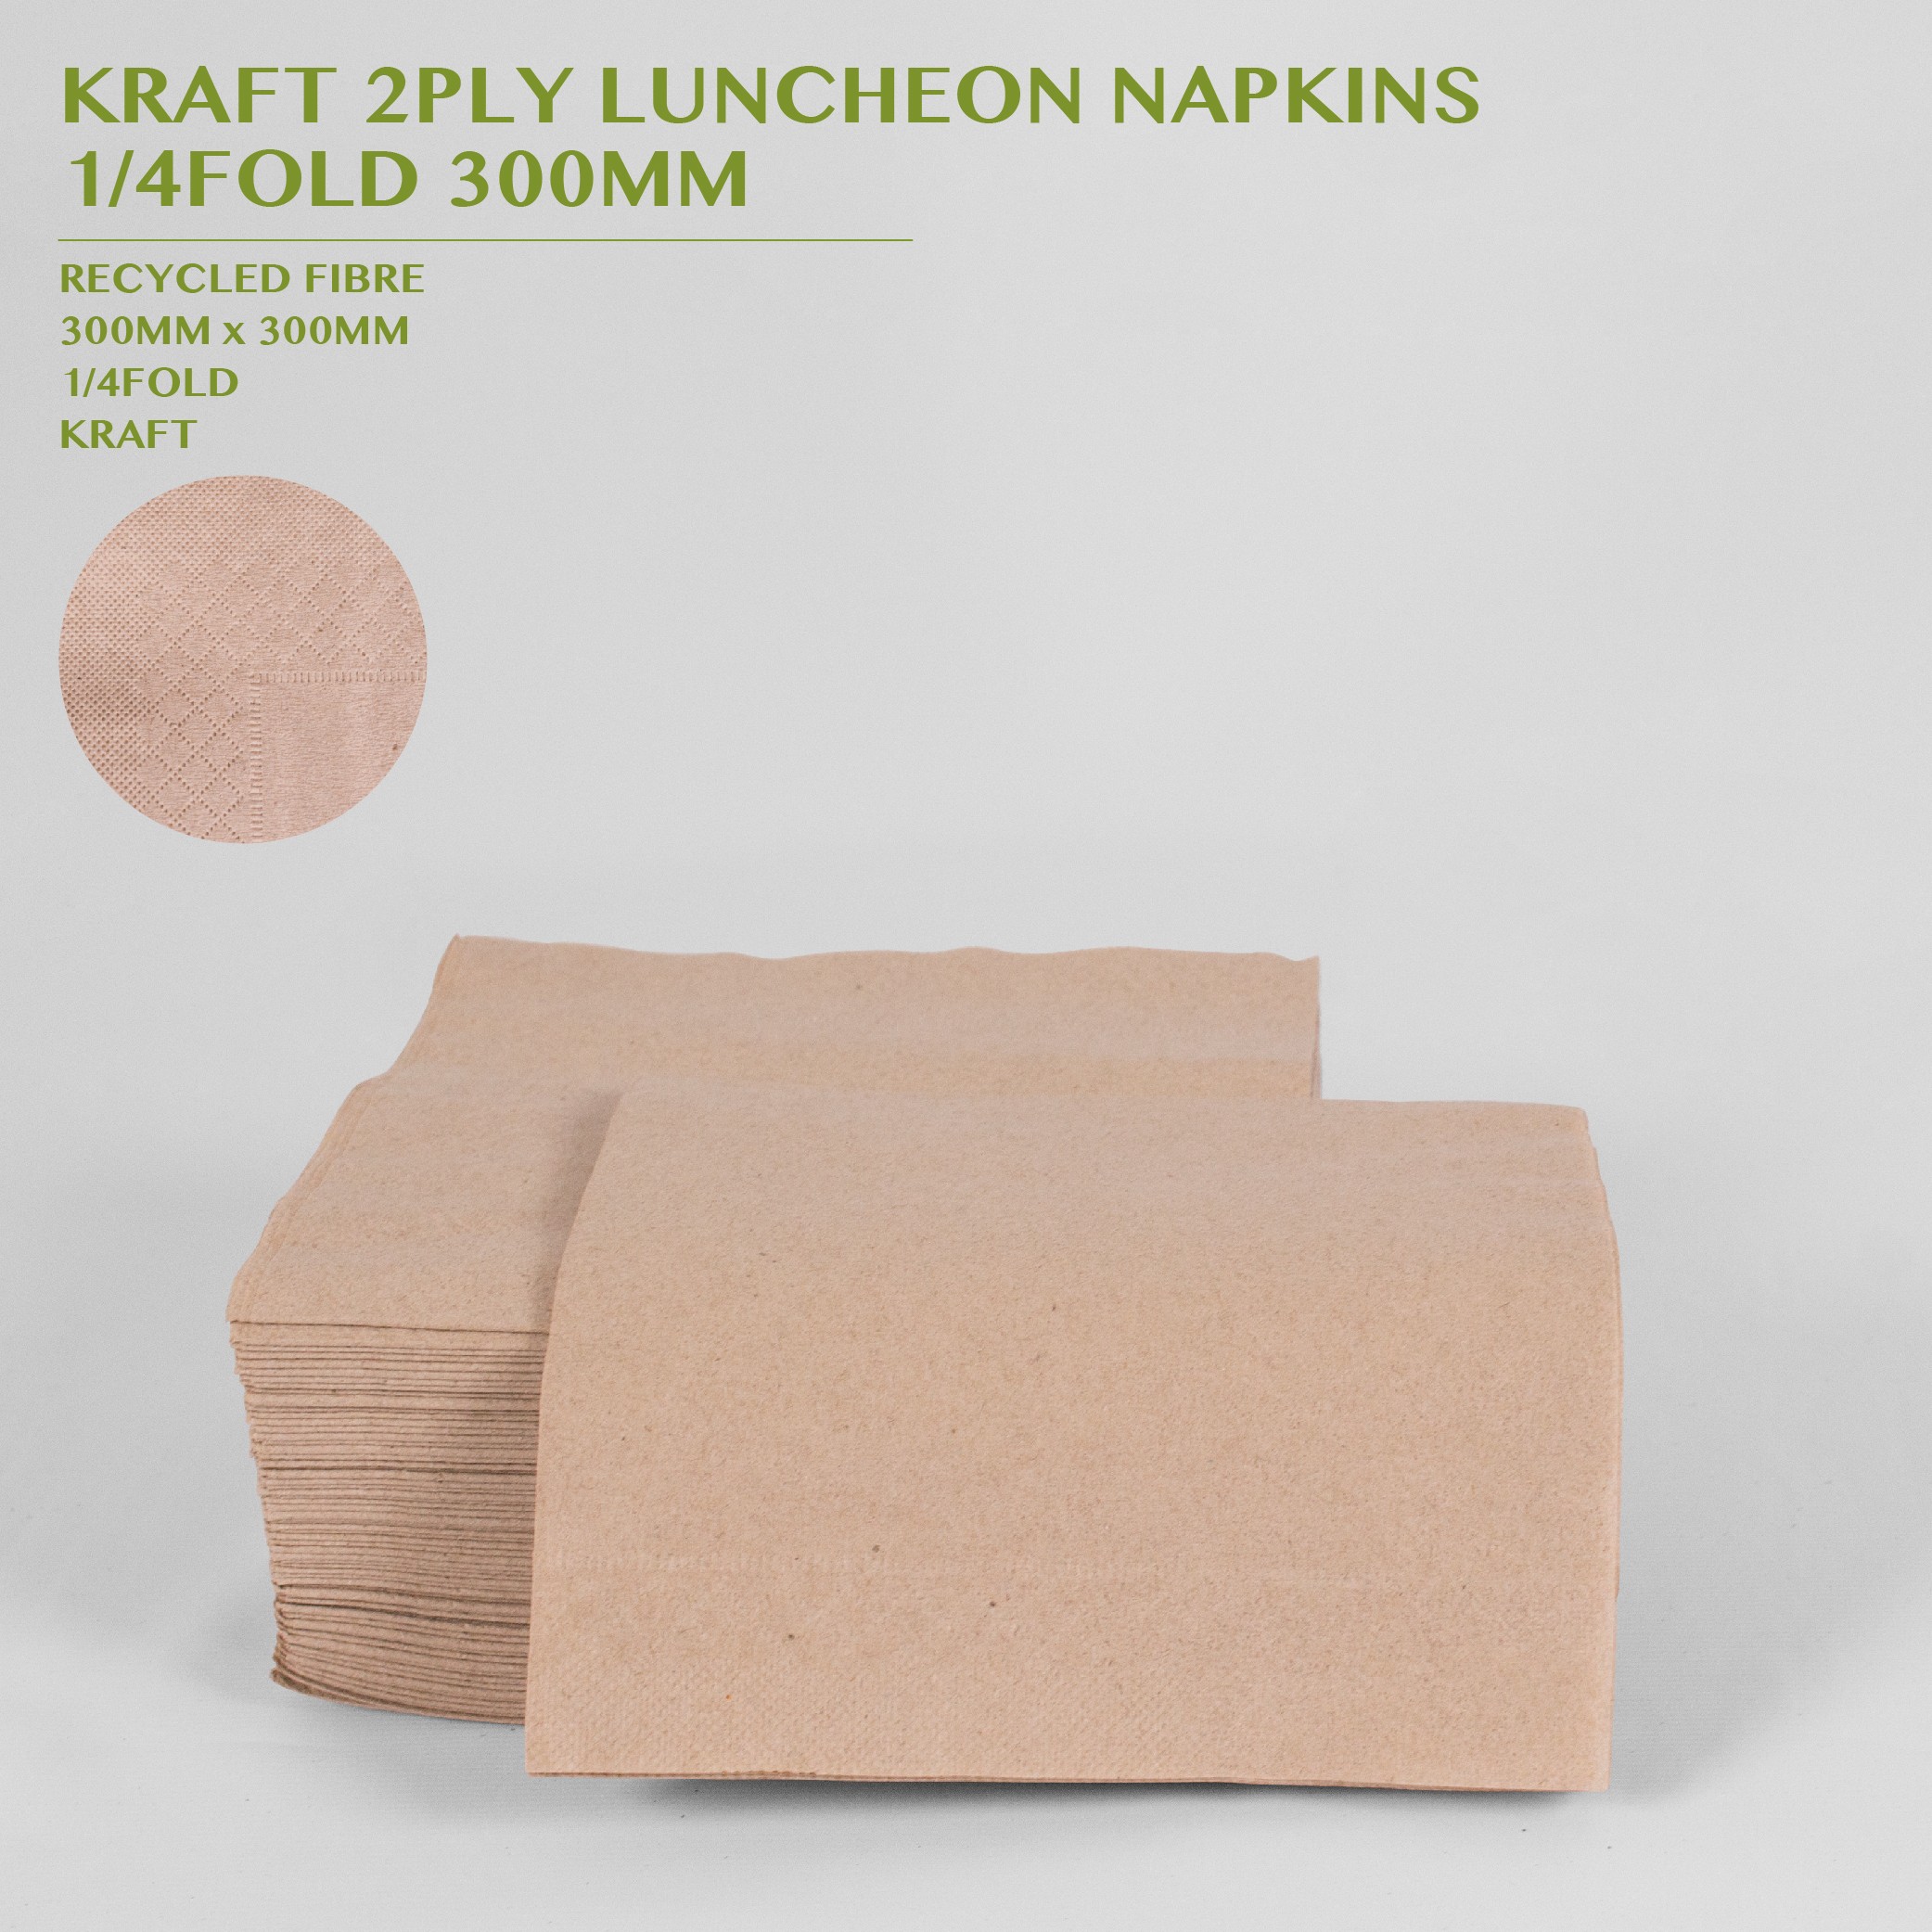 PRE-ORDER KRAFT 2PLY LUNCHEON NAPKINS  1/4FOLD 300MM 100PACK